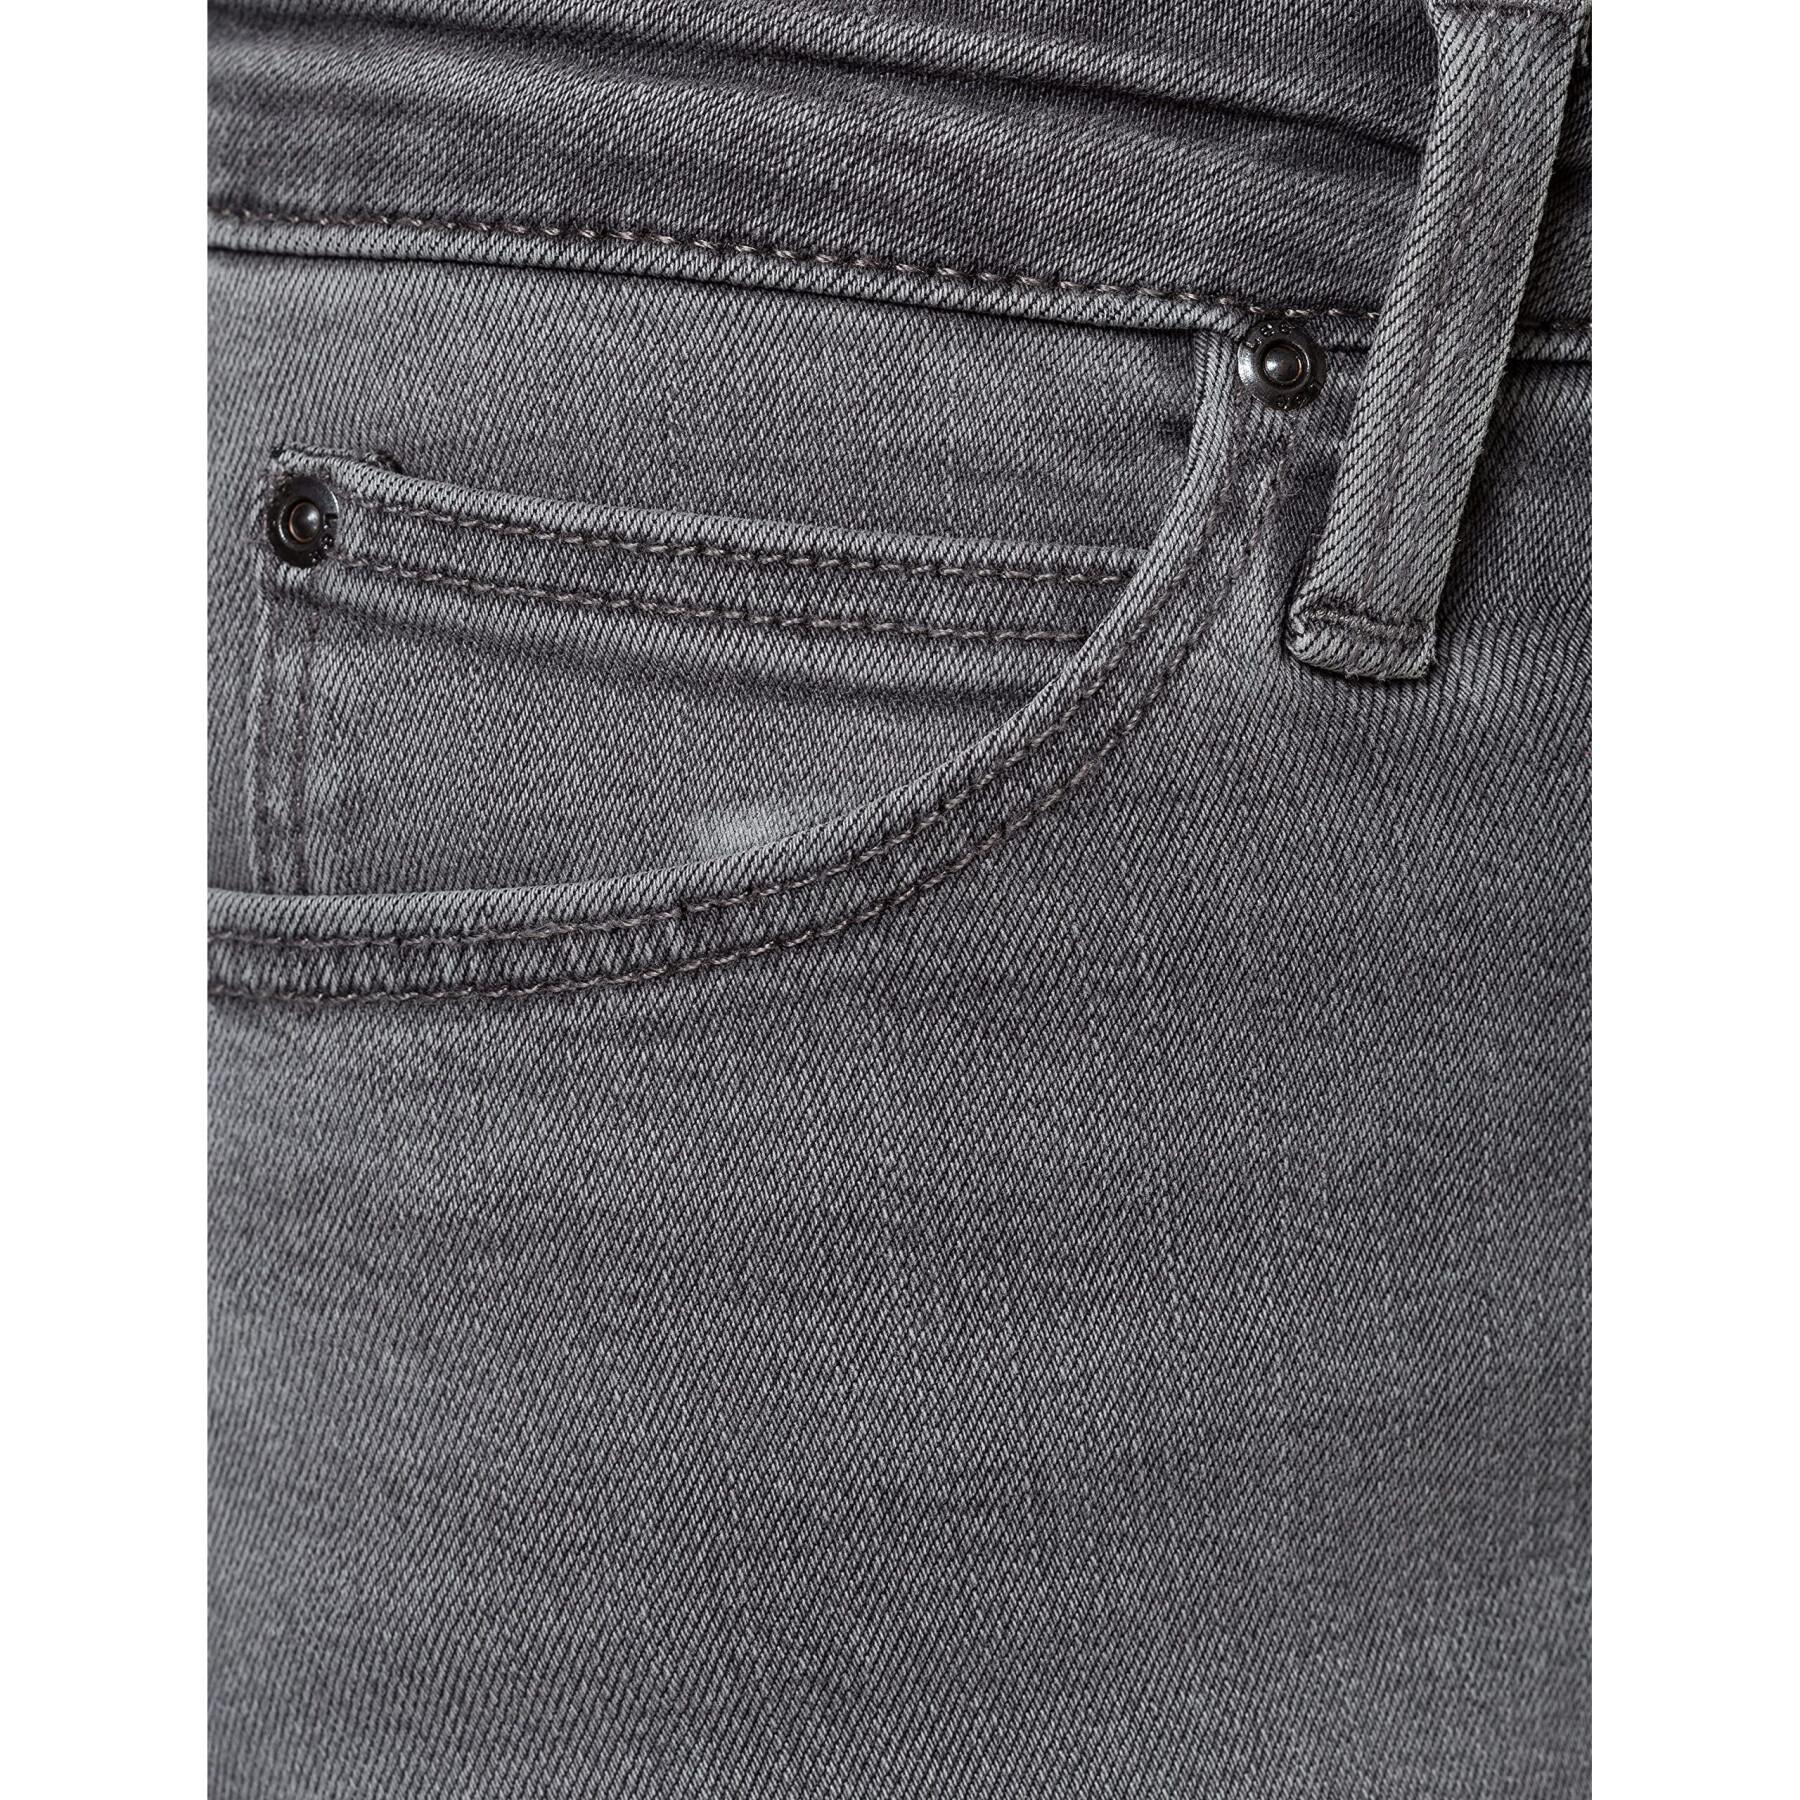 Jeans da donna Lee Marion Straight in Grey Holly